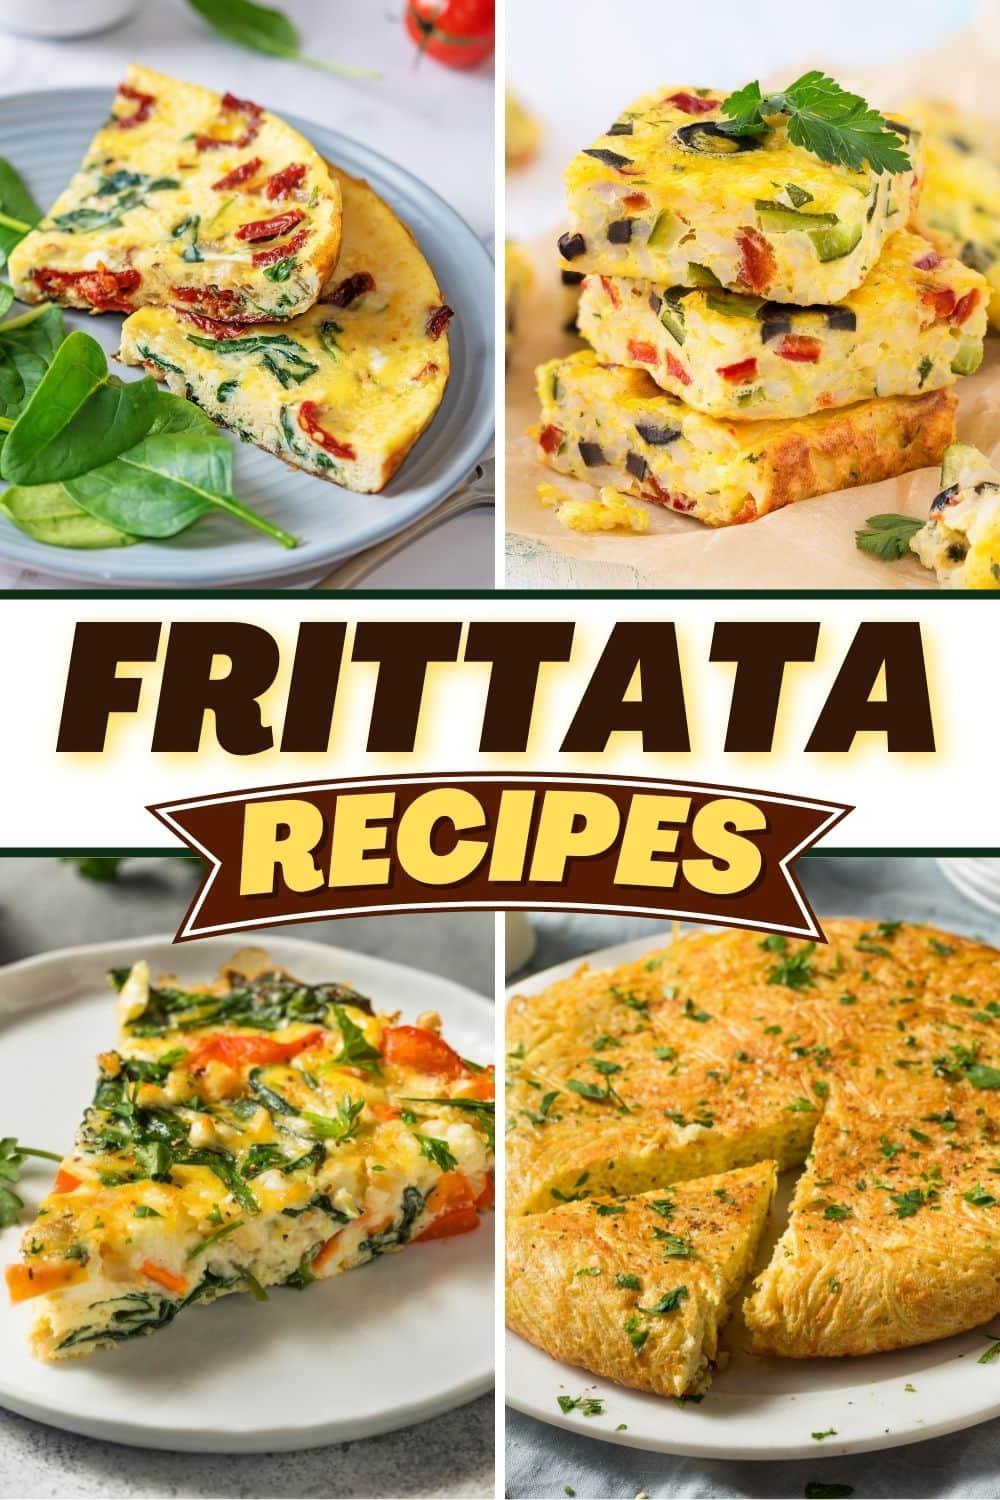 13 Frittata Recipes That Are Perfect for Brunch - Insanely Good